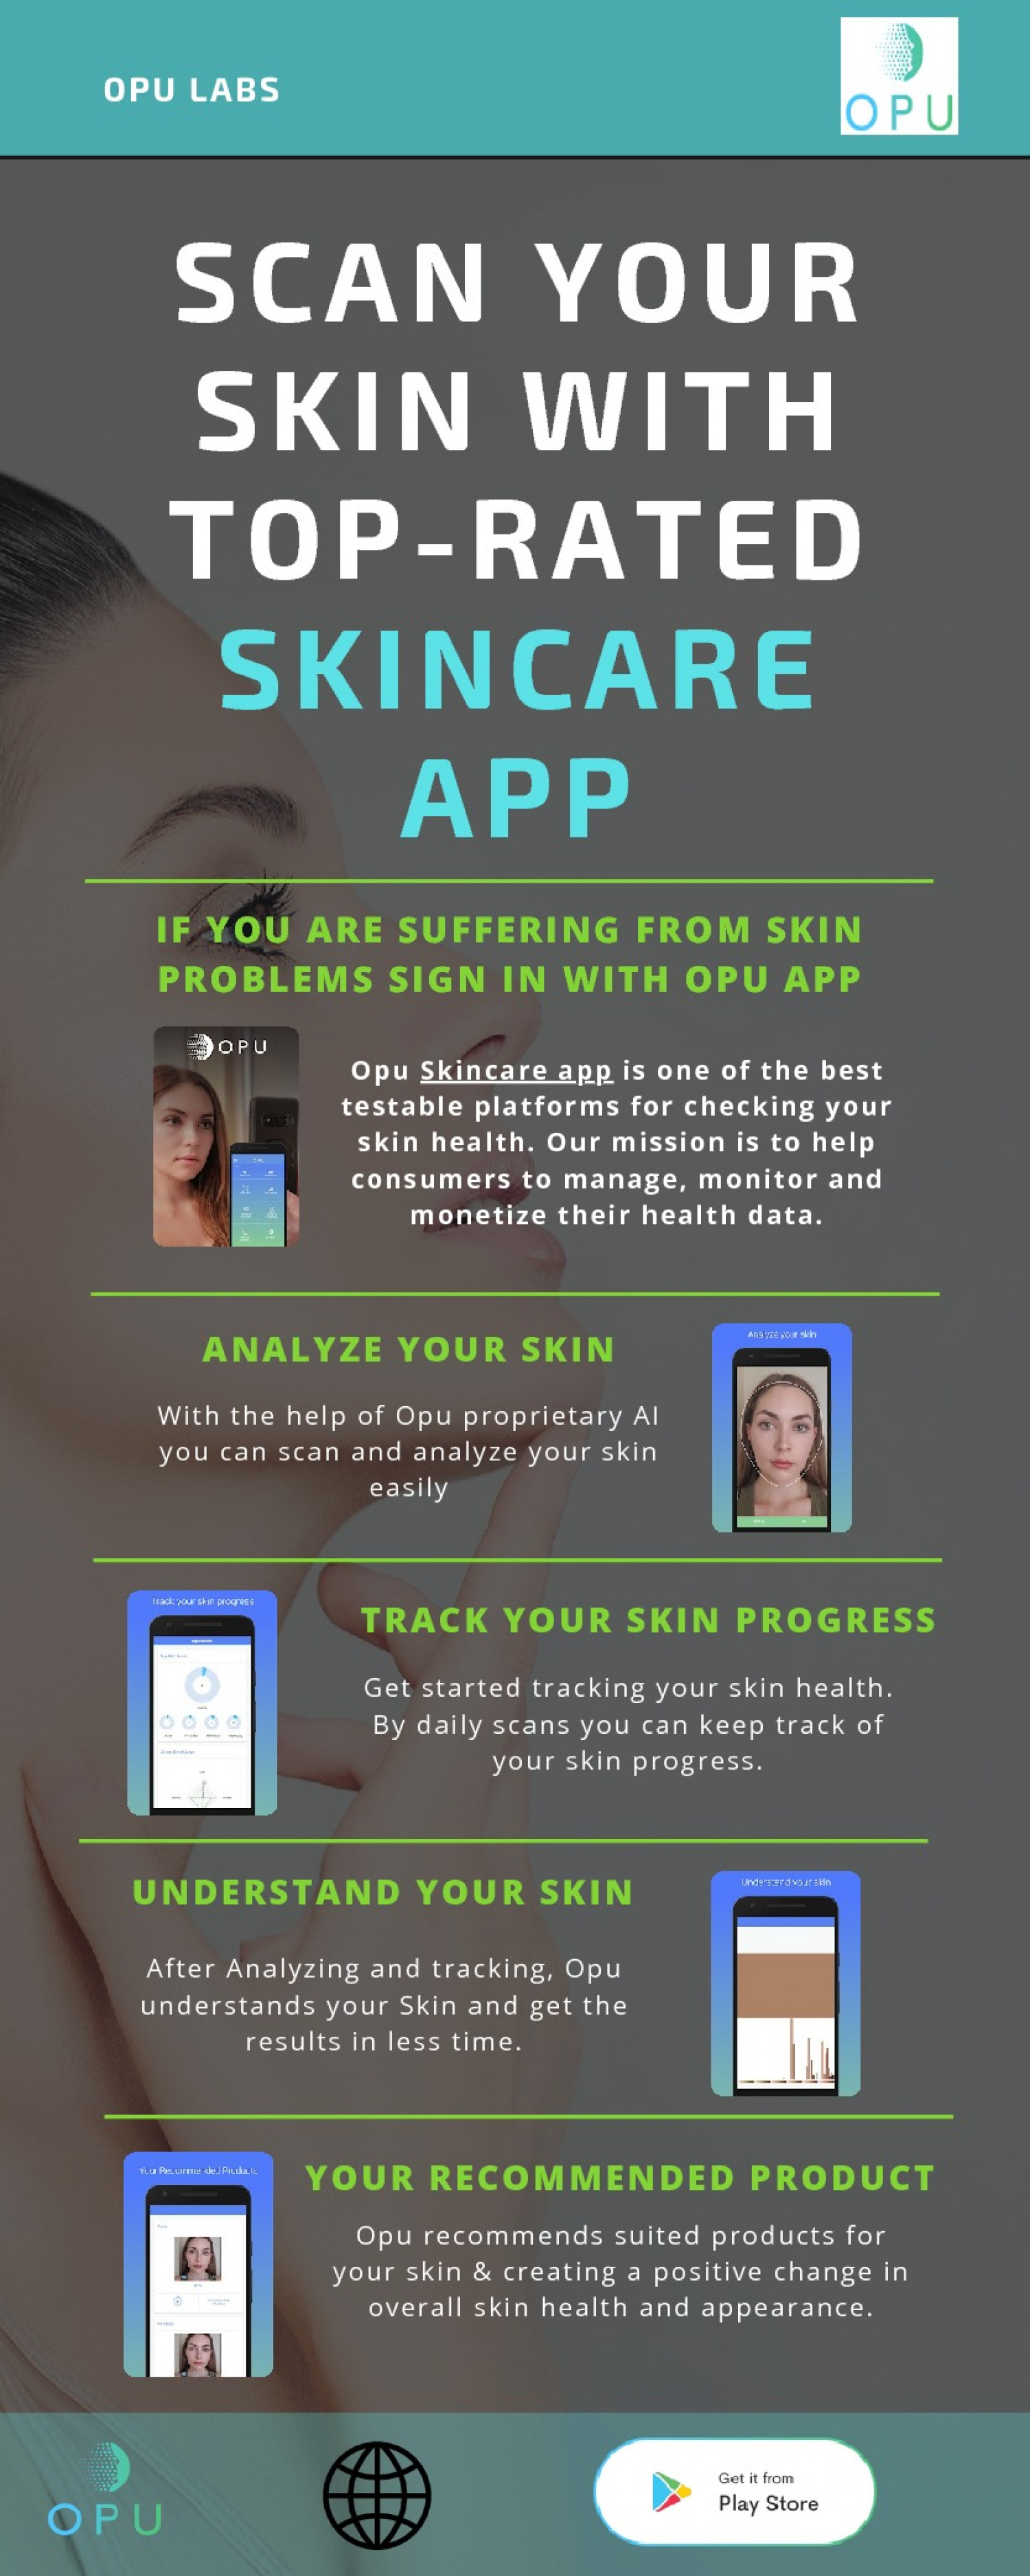 Scan your Skin with Top-Rated Skincare App Infographic